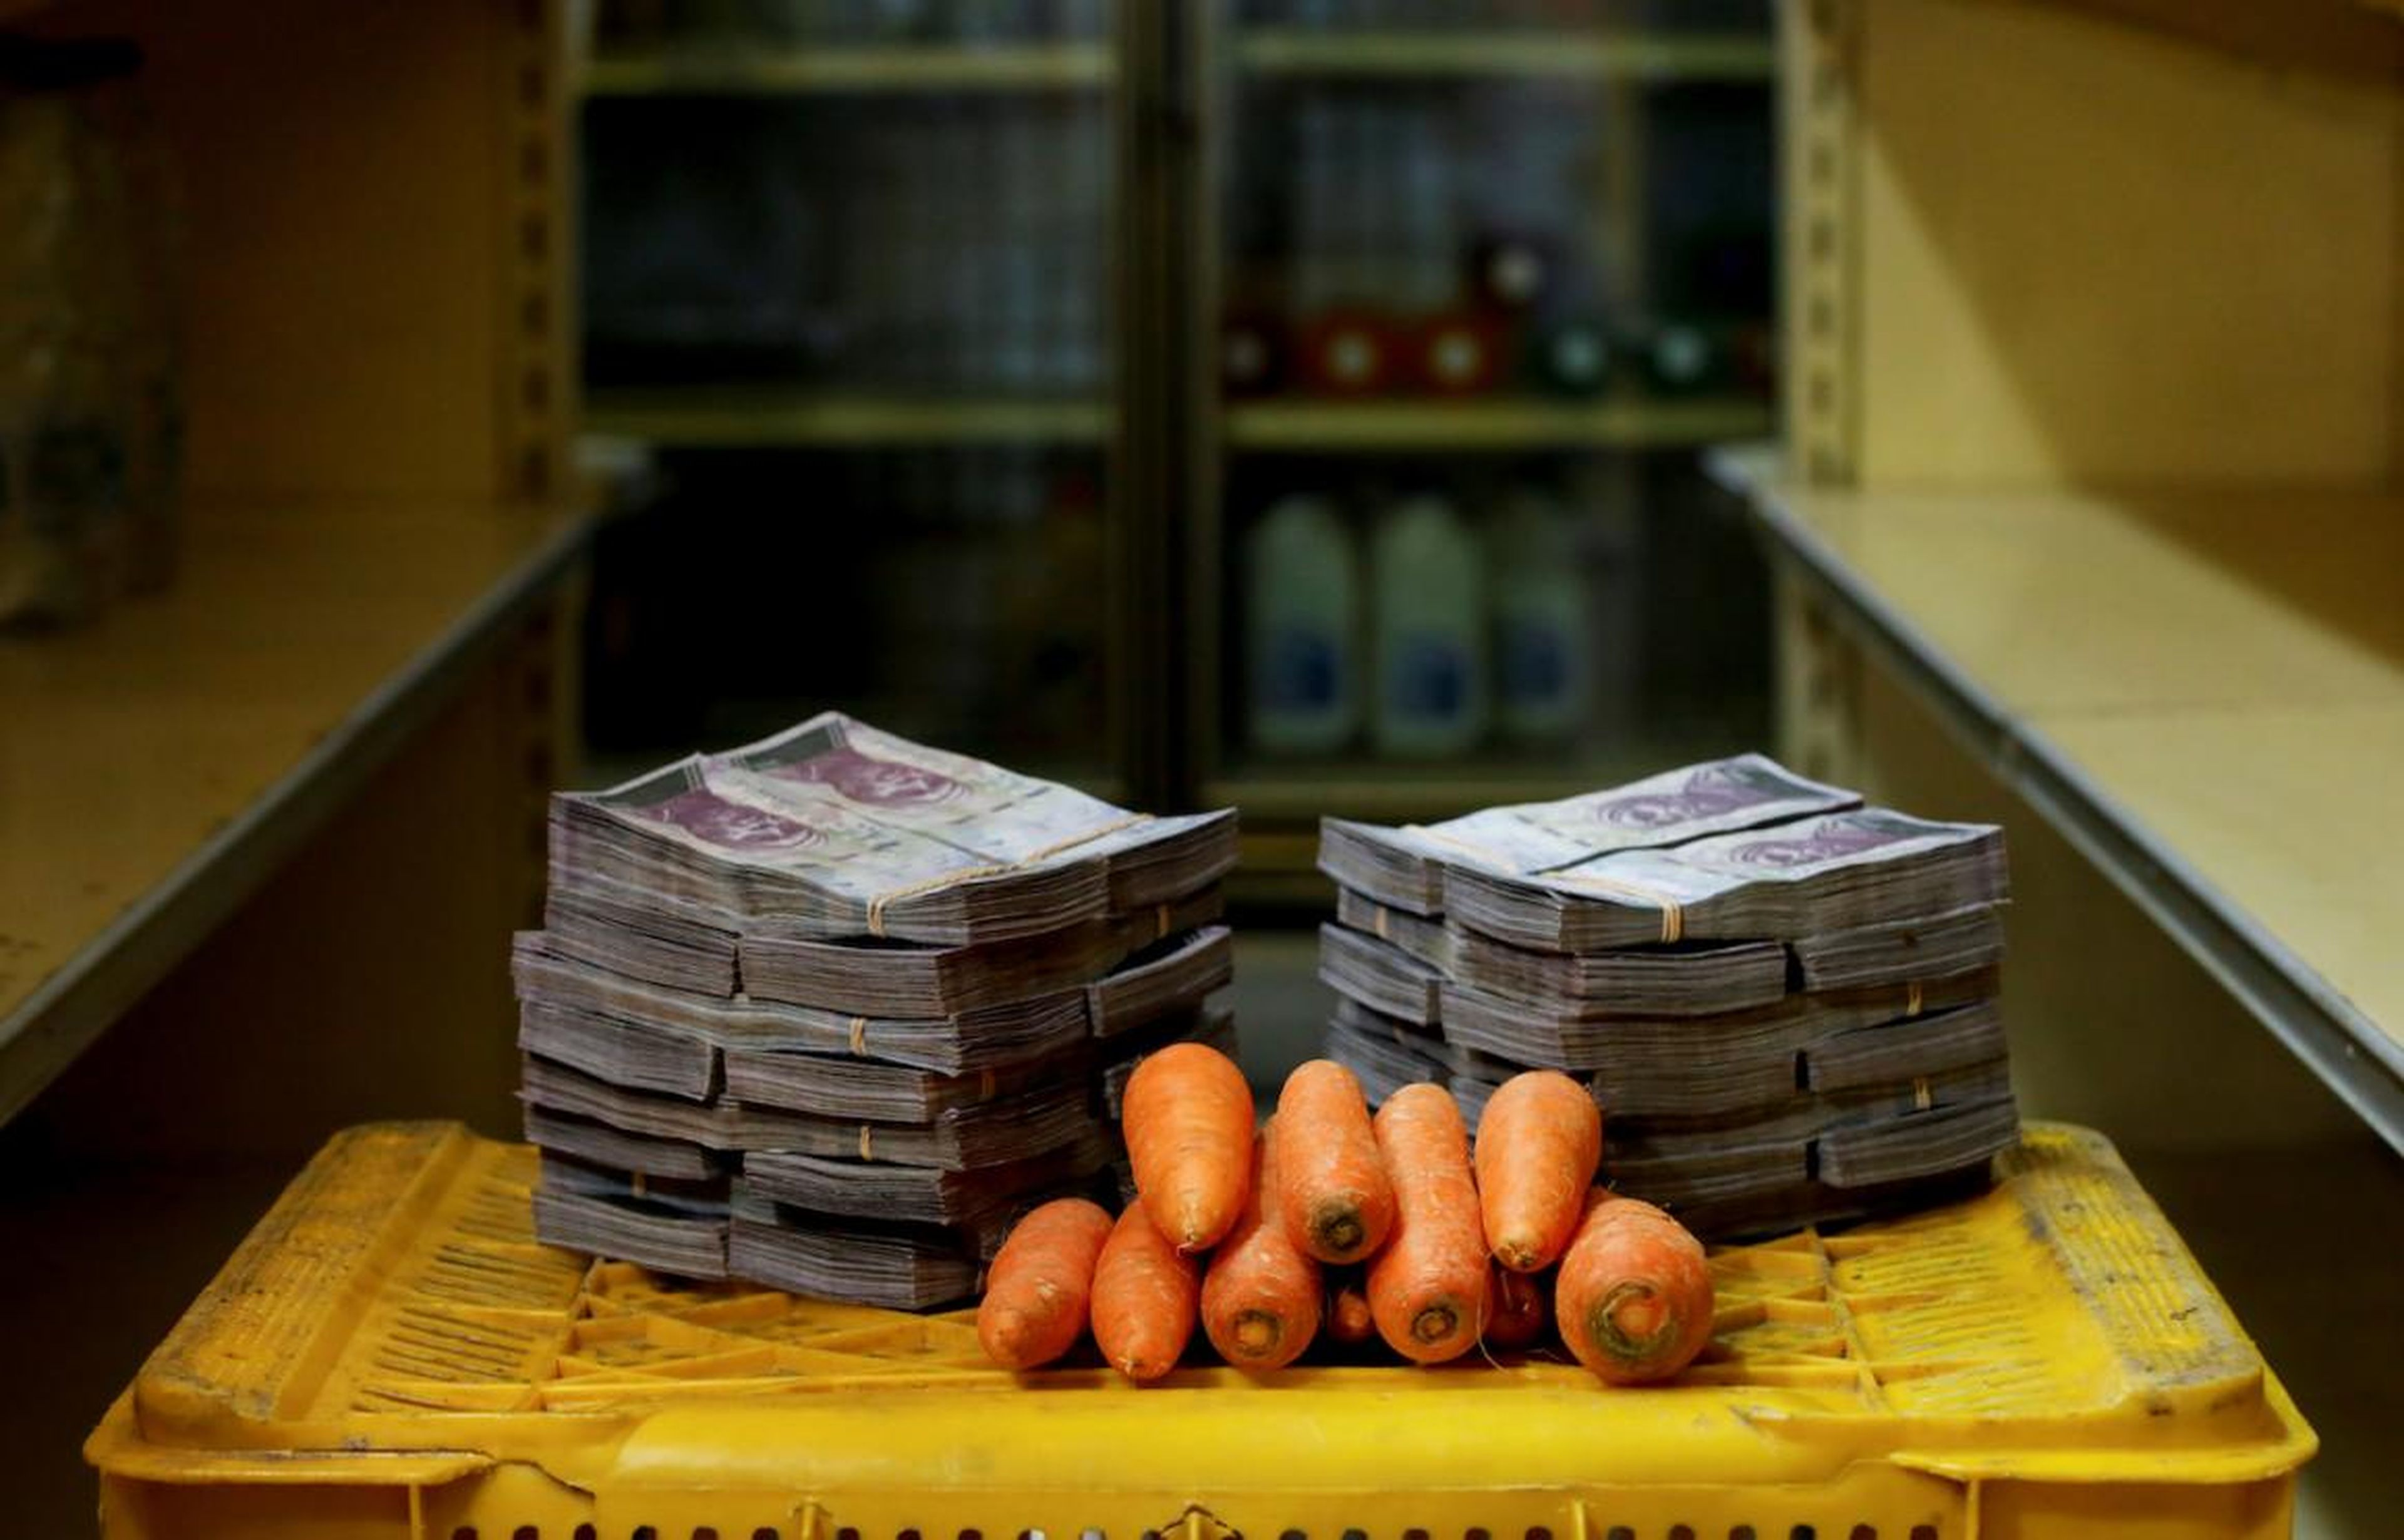 A kilogram of carrots is pictured next to 3,000,000 bolivars, its price and the equivalent of 0.46 USD, at a mini-market in Caracas, Venezuela.